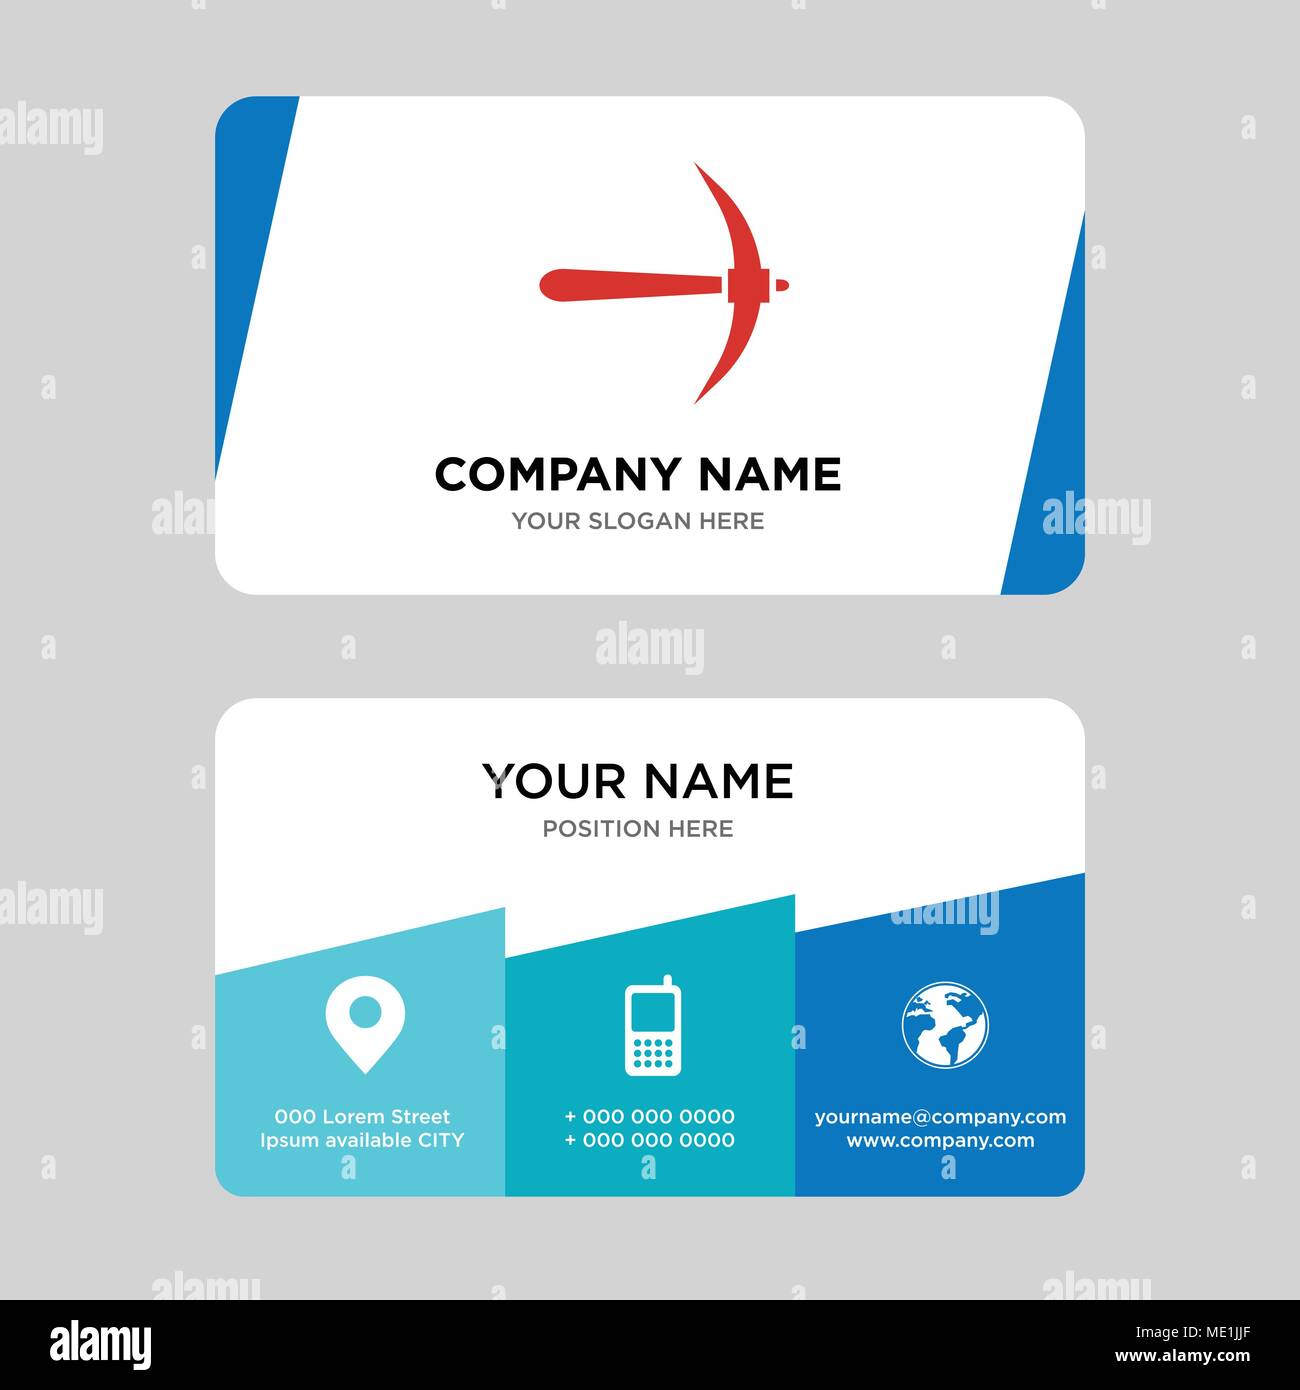 hammer business card design template, Visiting for your company, Modern Creative and Clean identity Card Vector Illustration Stock Vector